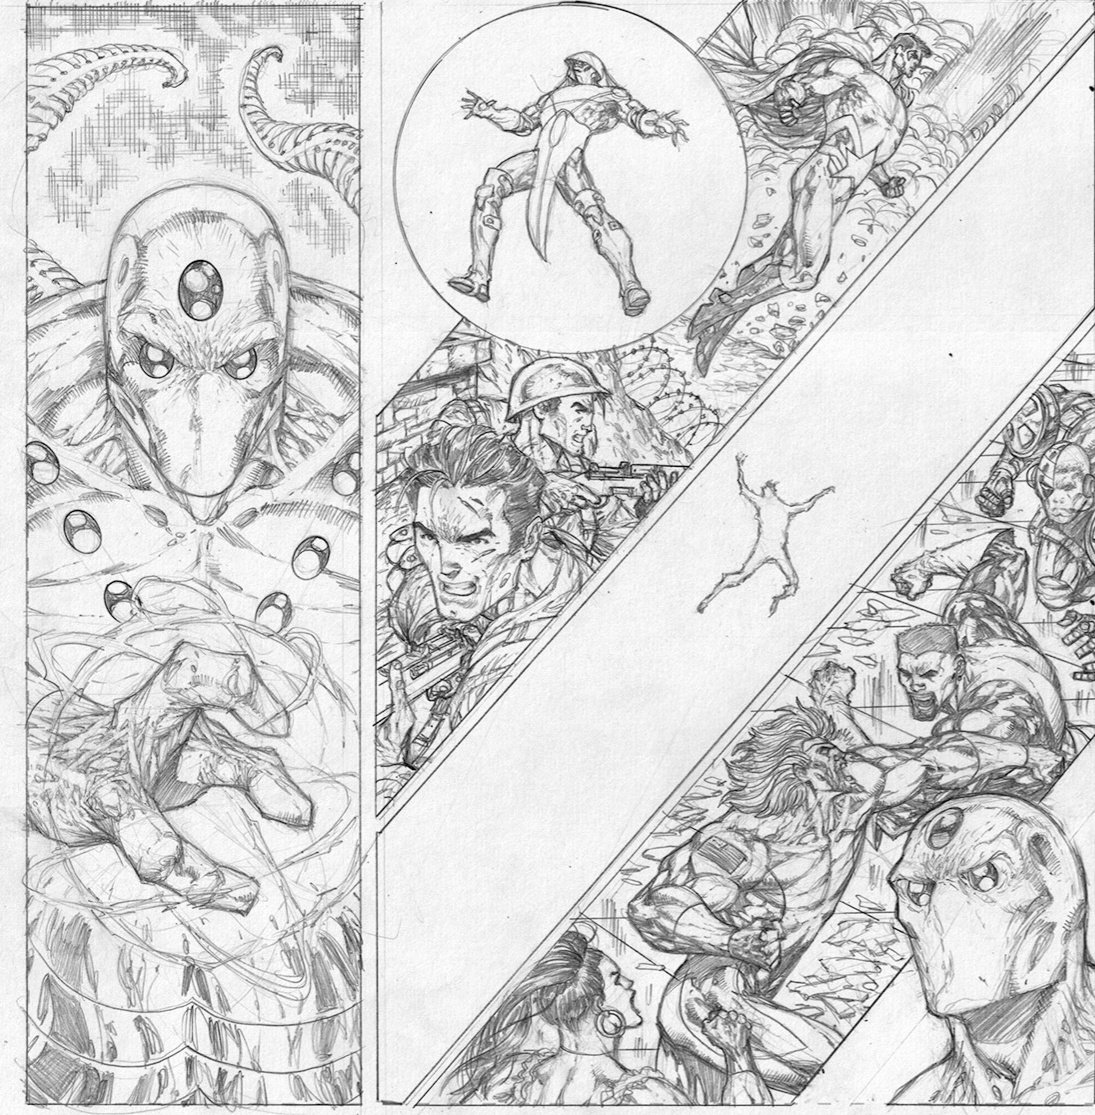 A scene from the upcoming issue of the COSMOS Maxi-Series sees Dominion take on the cosmic powers known as The Universals in a knock-down, drag-out battle for the fate of the universe! Pencils by Allan Goldman. #comics #ComicArt #indiecomics #comicbooks #COSMOS